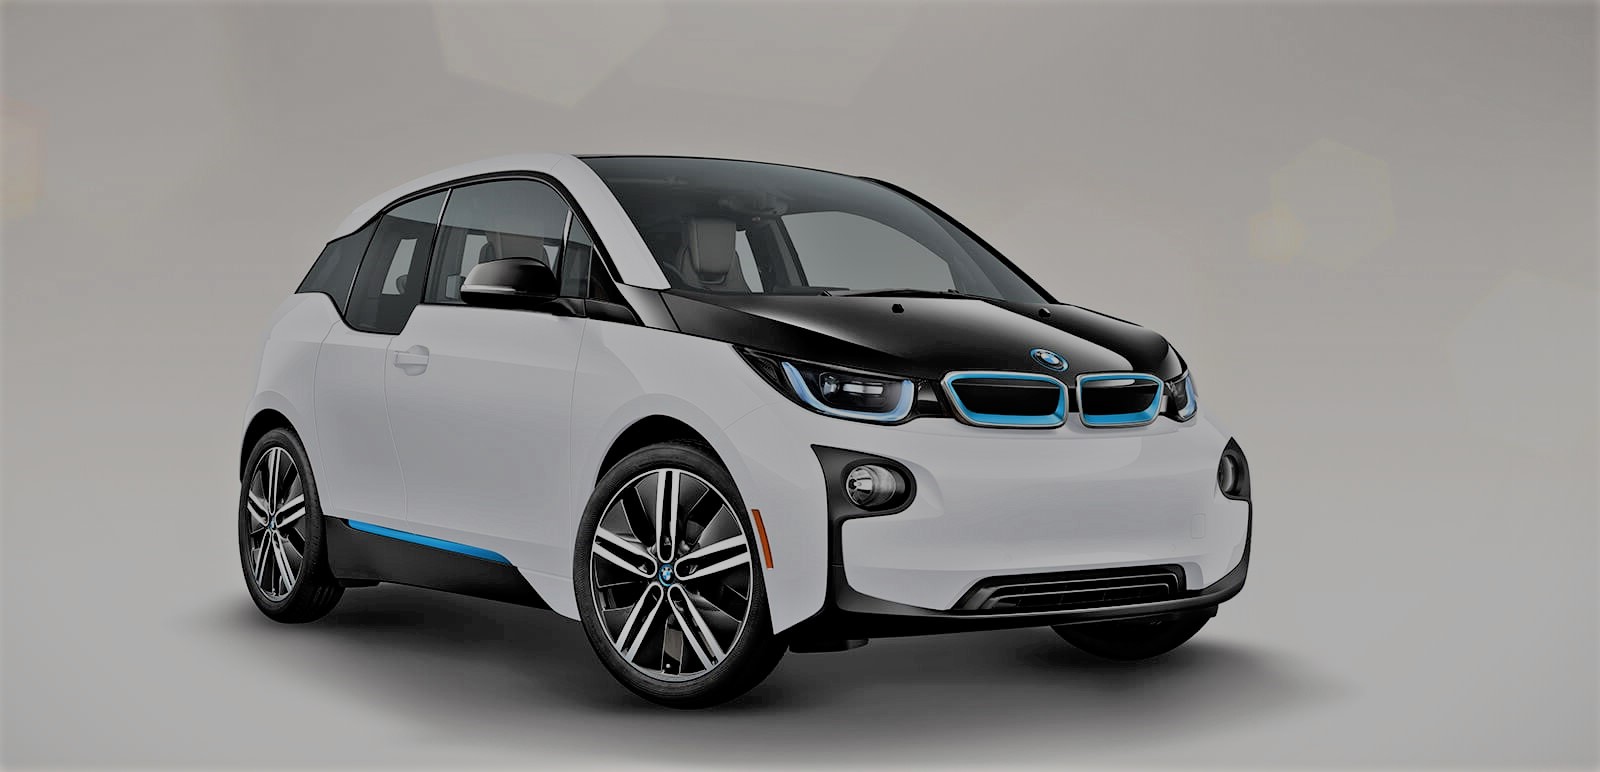 BMW i3 electric car review: key features